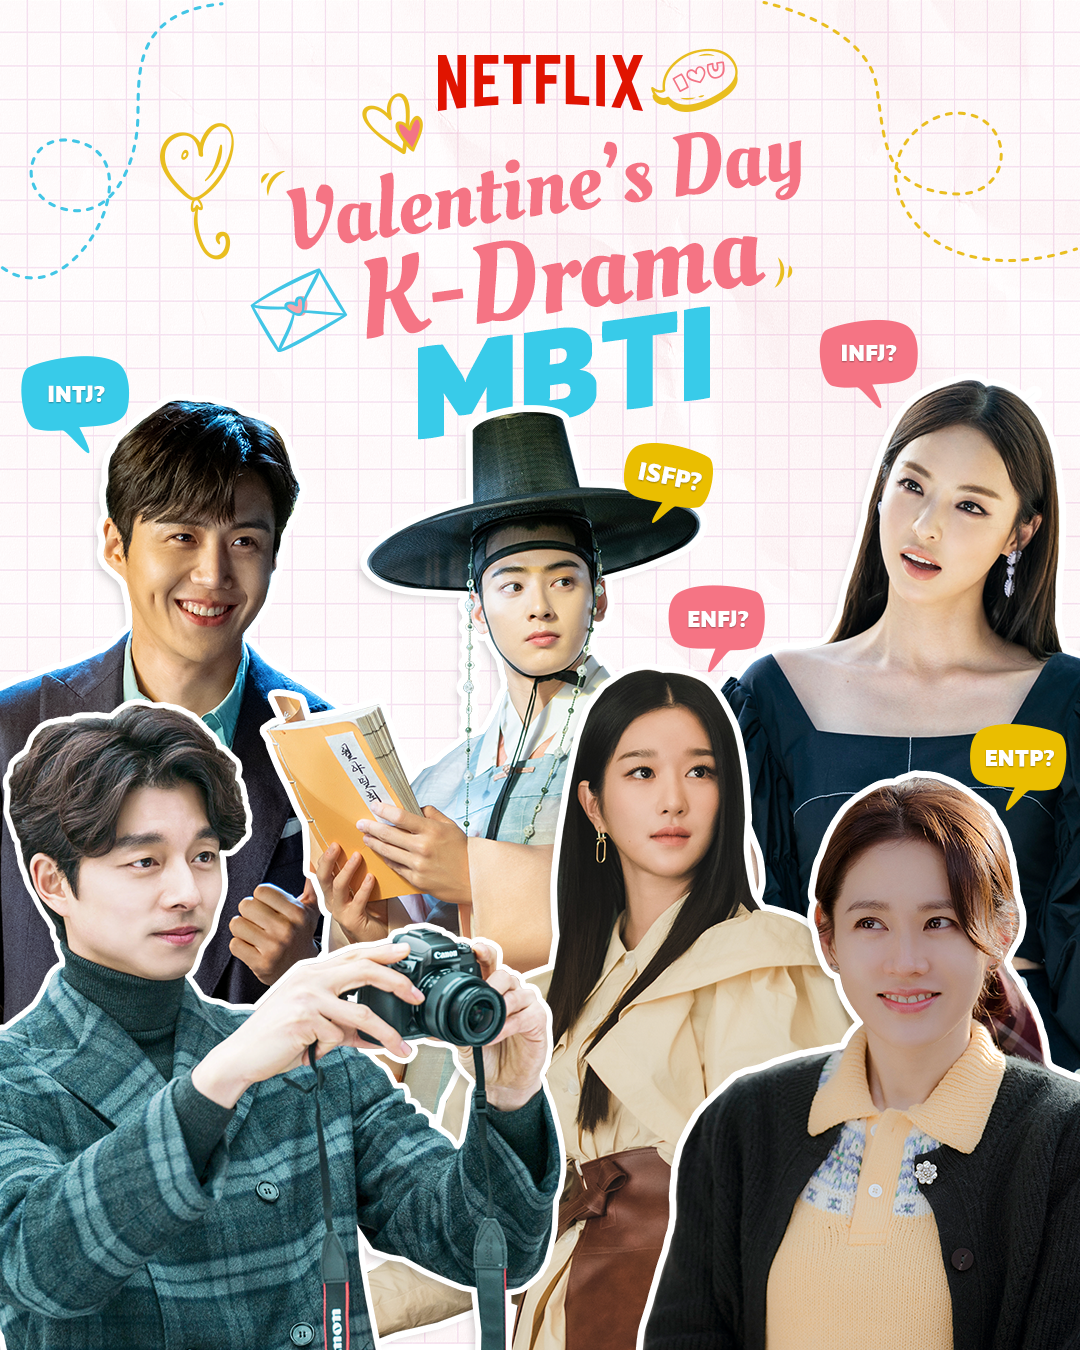 Who's Your K-Drama Love Match and Soulmates Based On Your MBTI Personality?